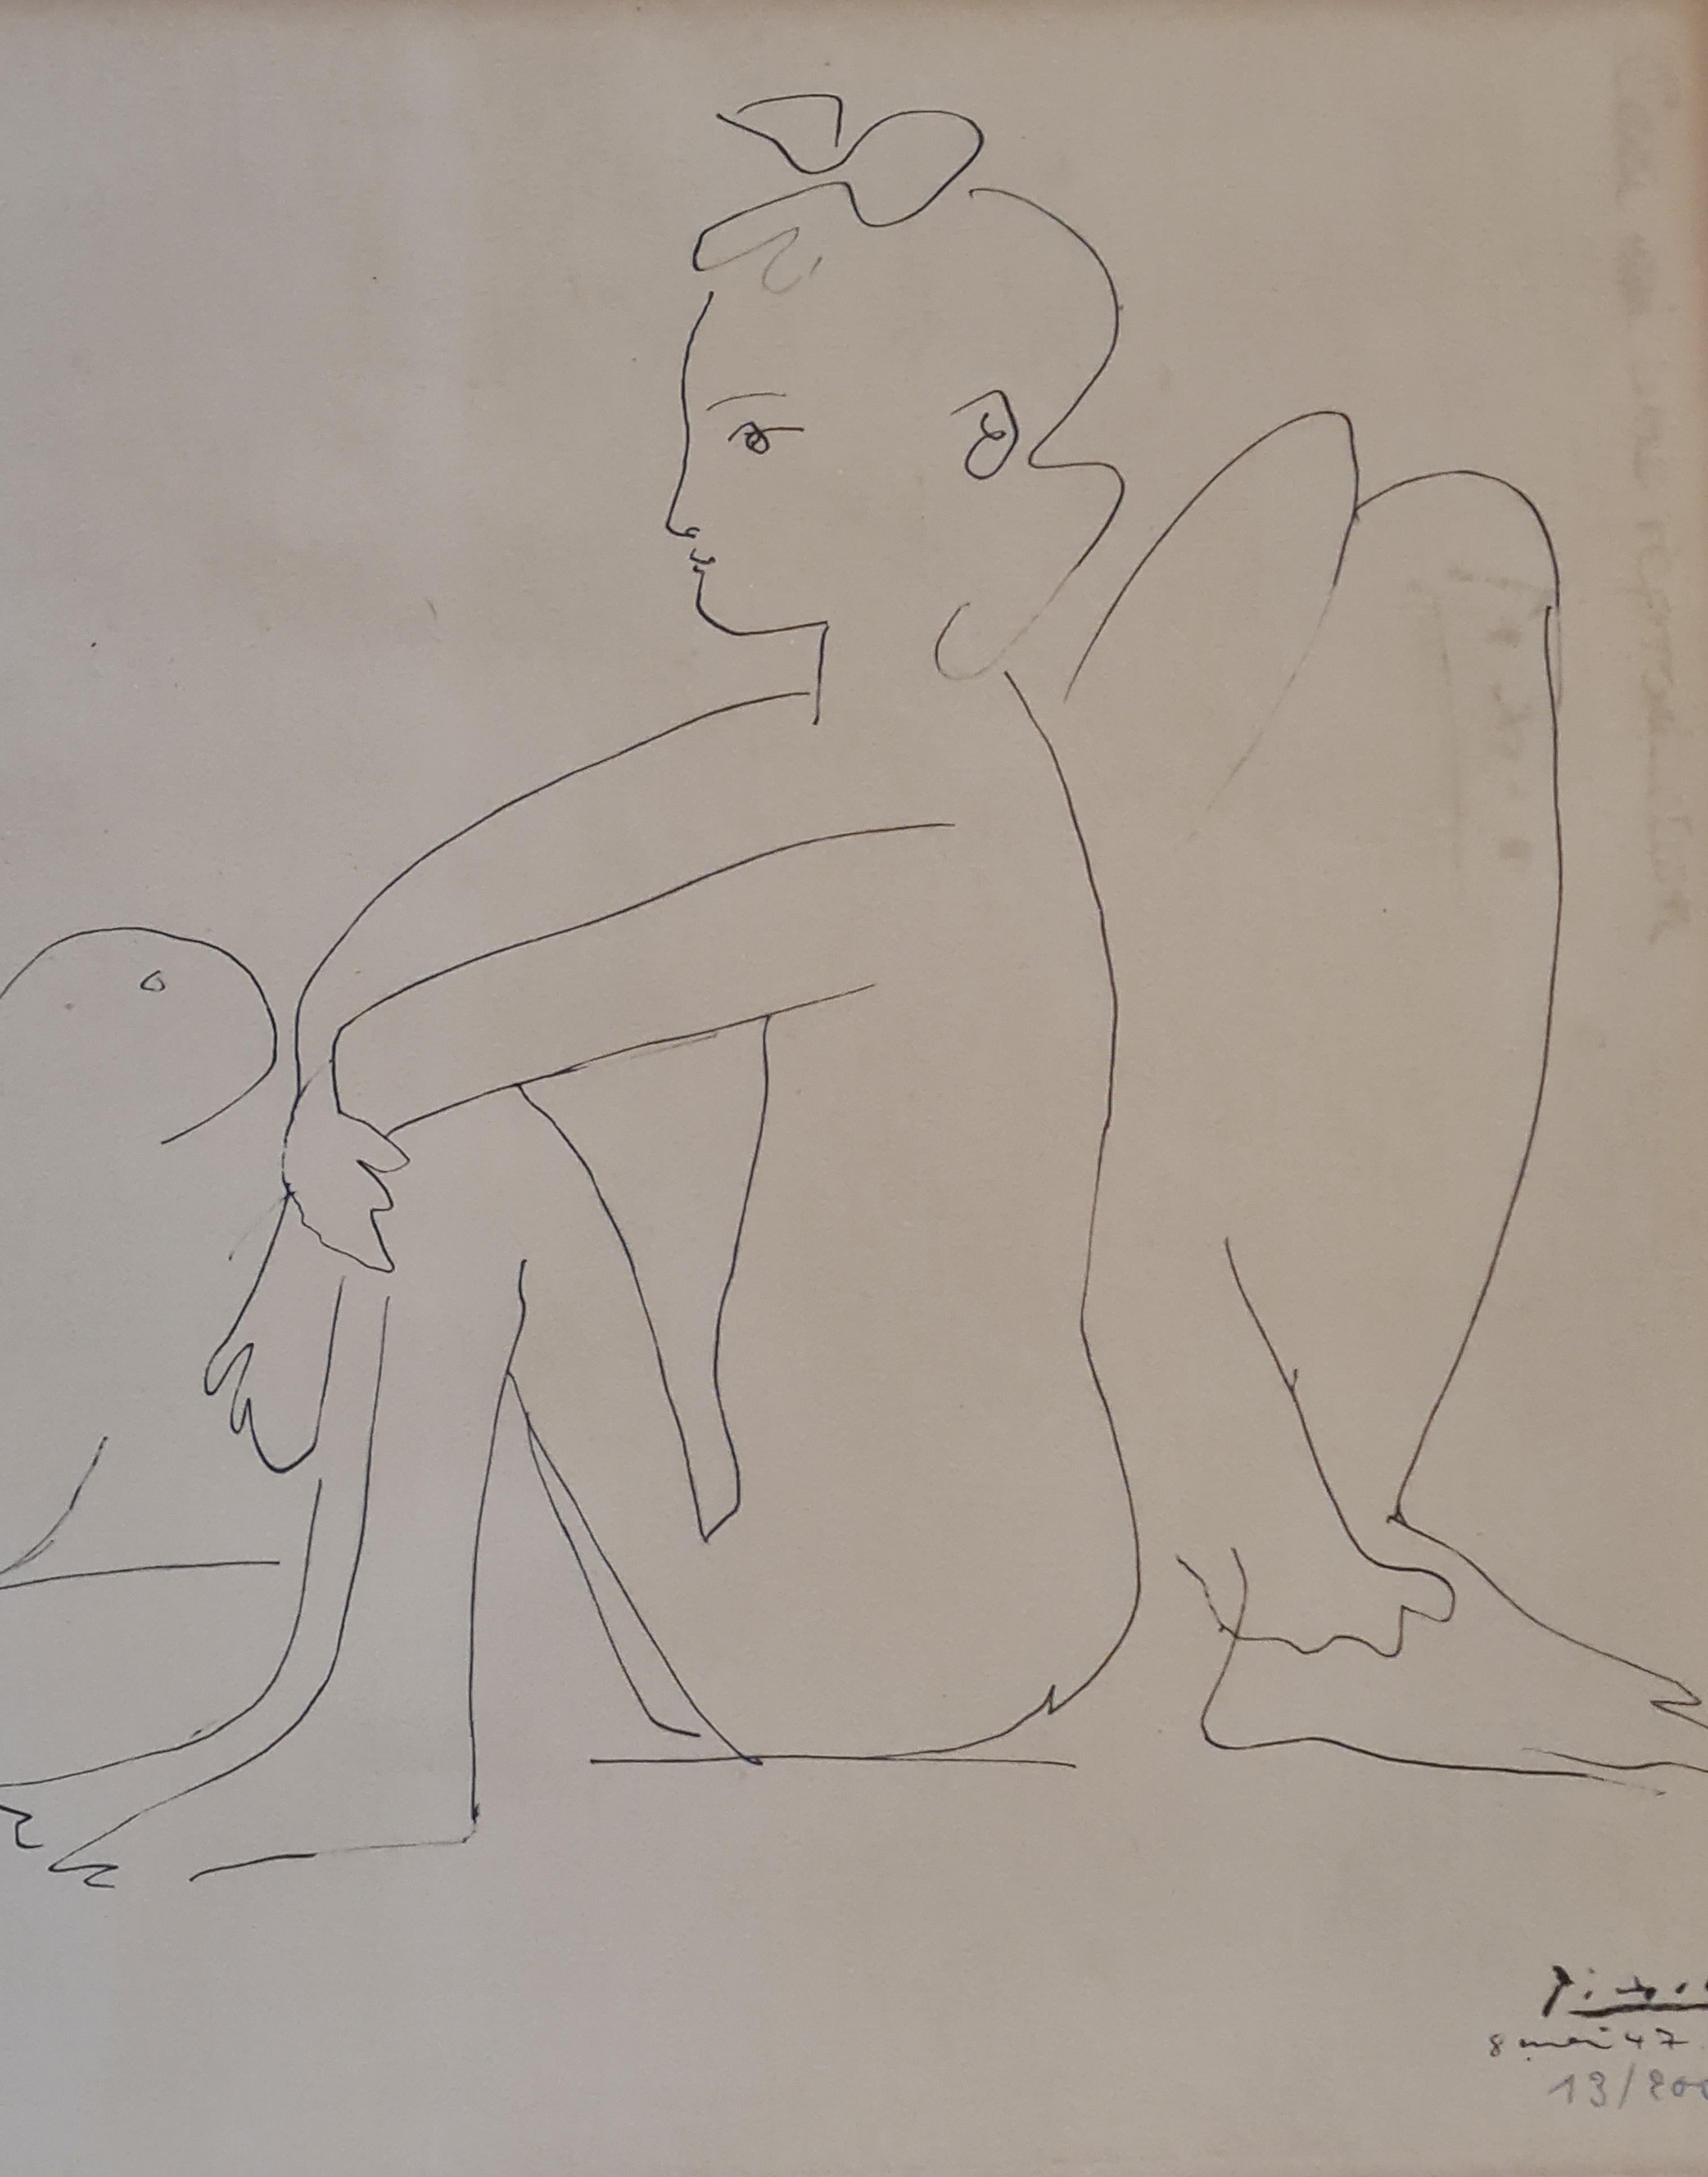 Le Repos IV, Signed/Dated Picasso 8 Mai 47 'dans la planche'. Numbered in Pencil - Brown Figurative Print by (after) Pablo Picasso